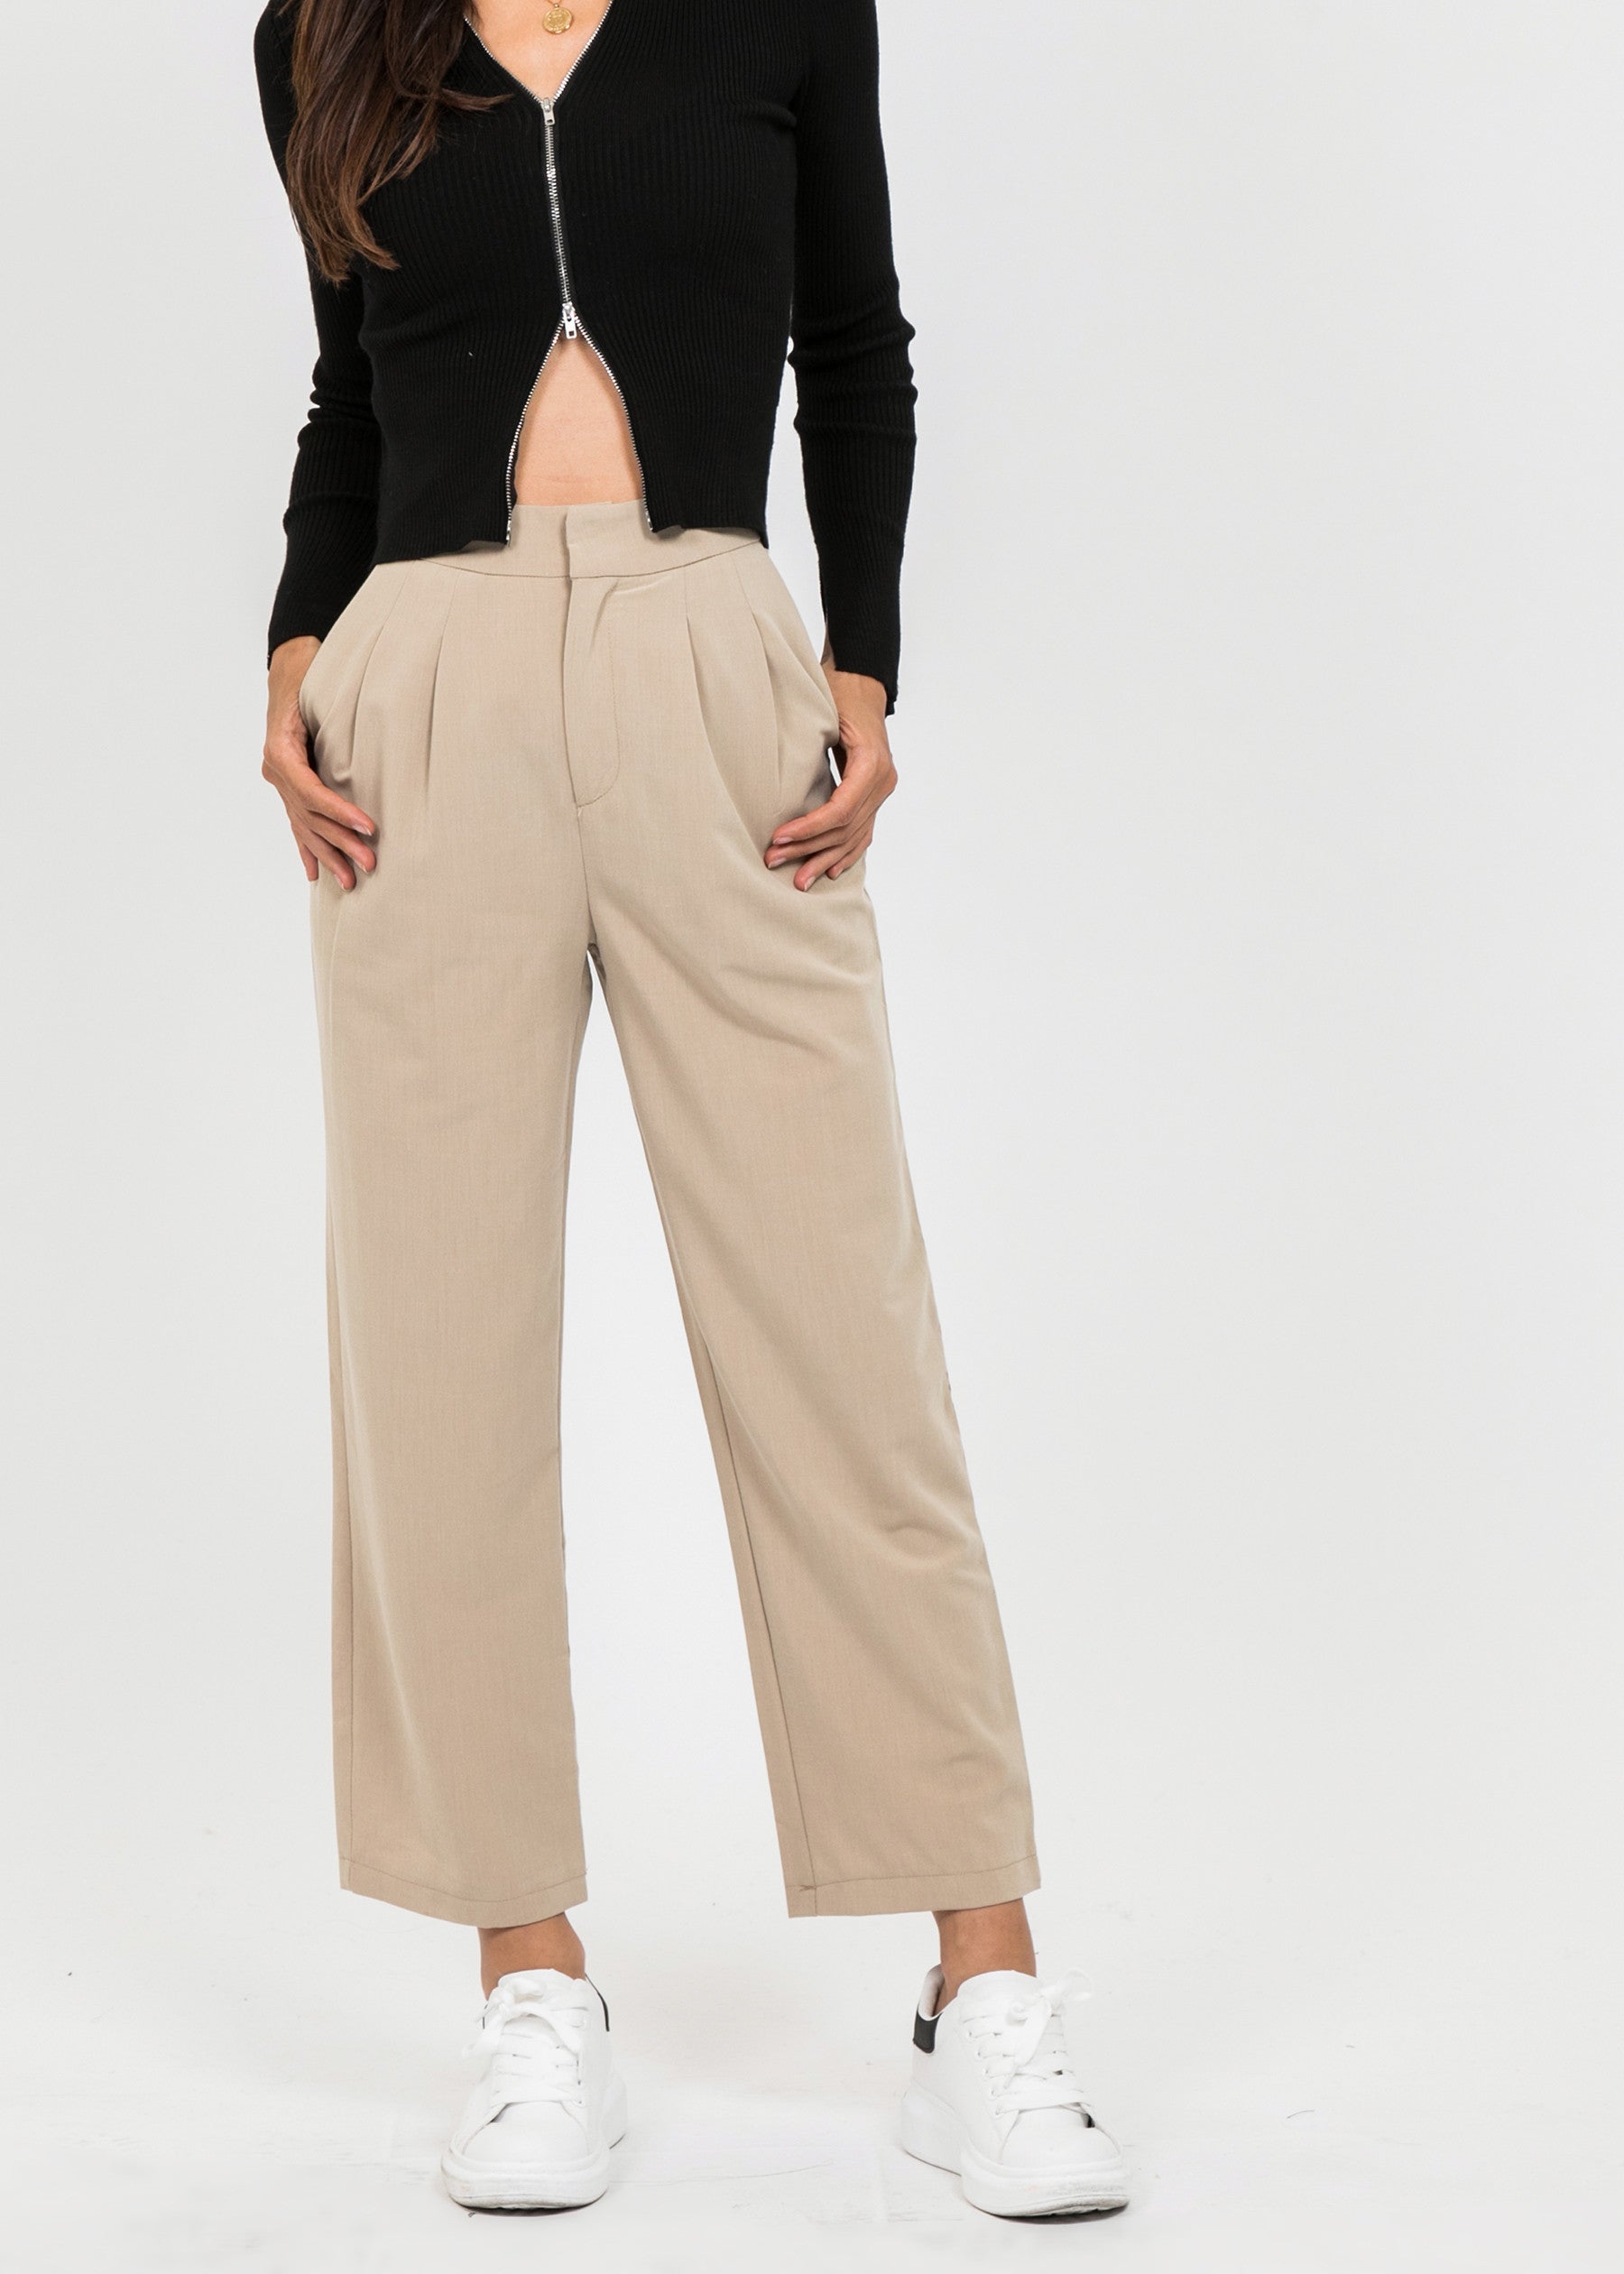 Pull&Bear high waisted tailored trousers in blue grey | ASOS